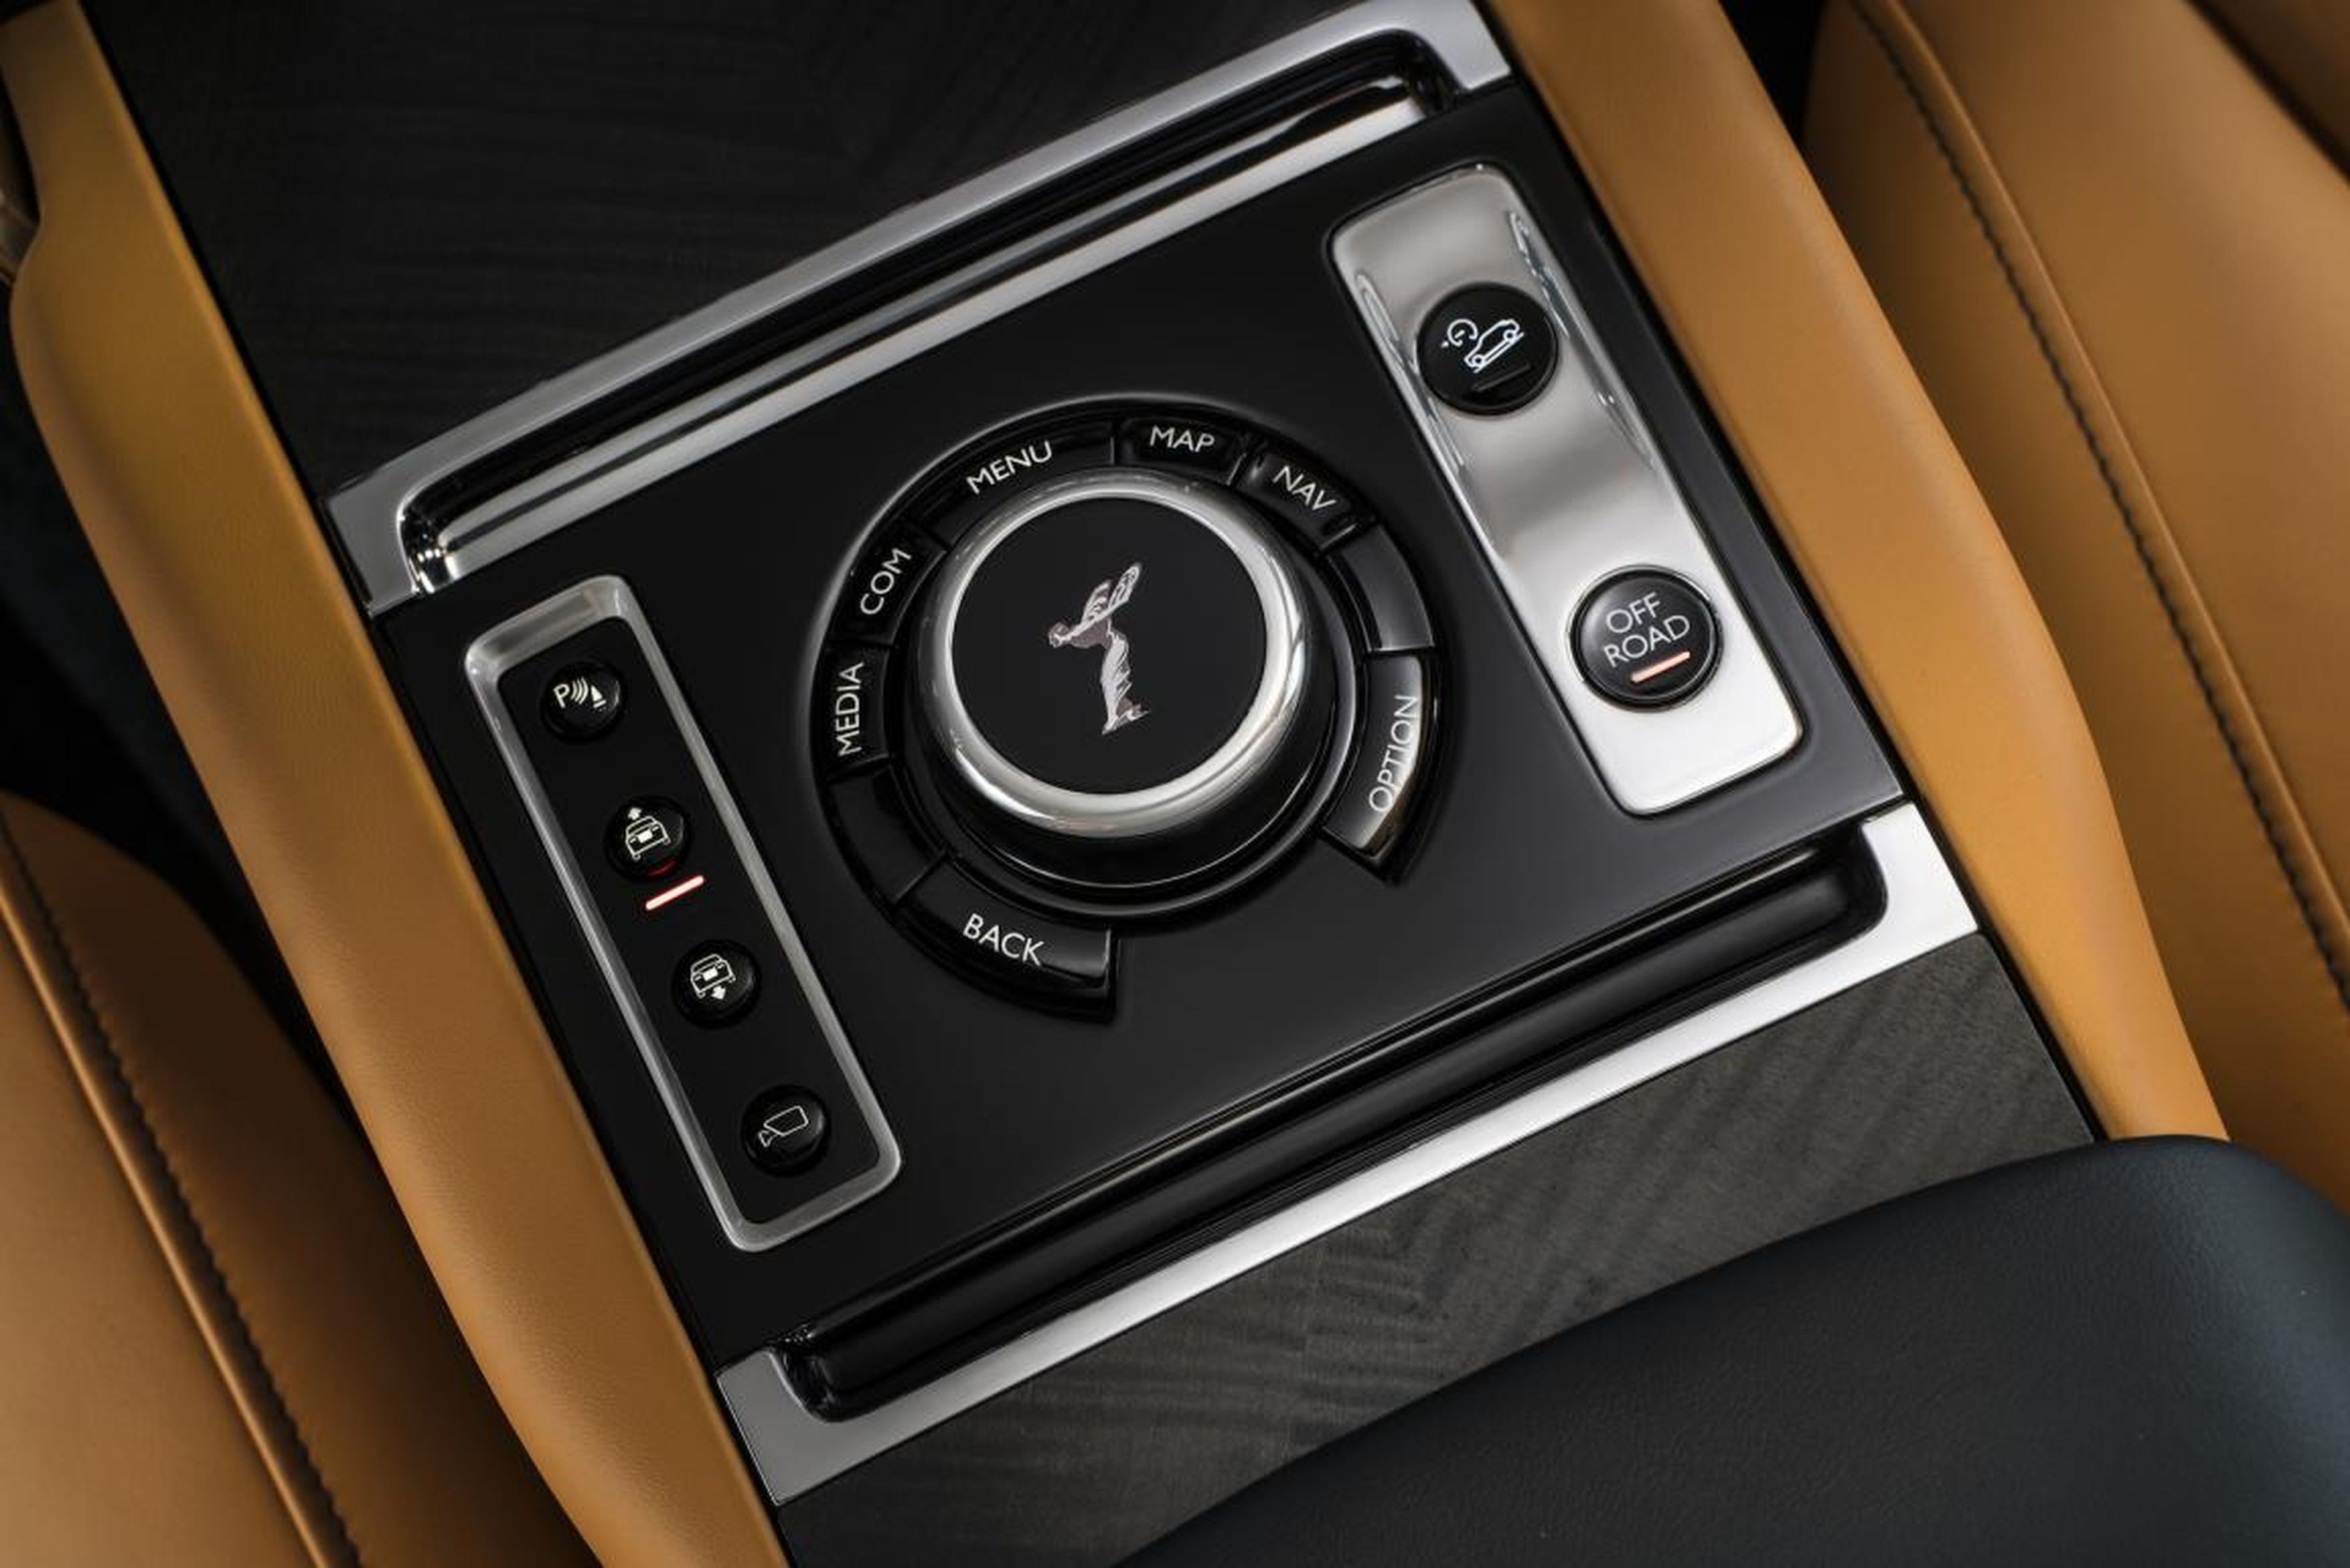 The Cullinan is loaded with tech, including active cruise control, night vision, a high-resolution head-up display, and multi-camera surround-view system.